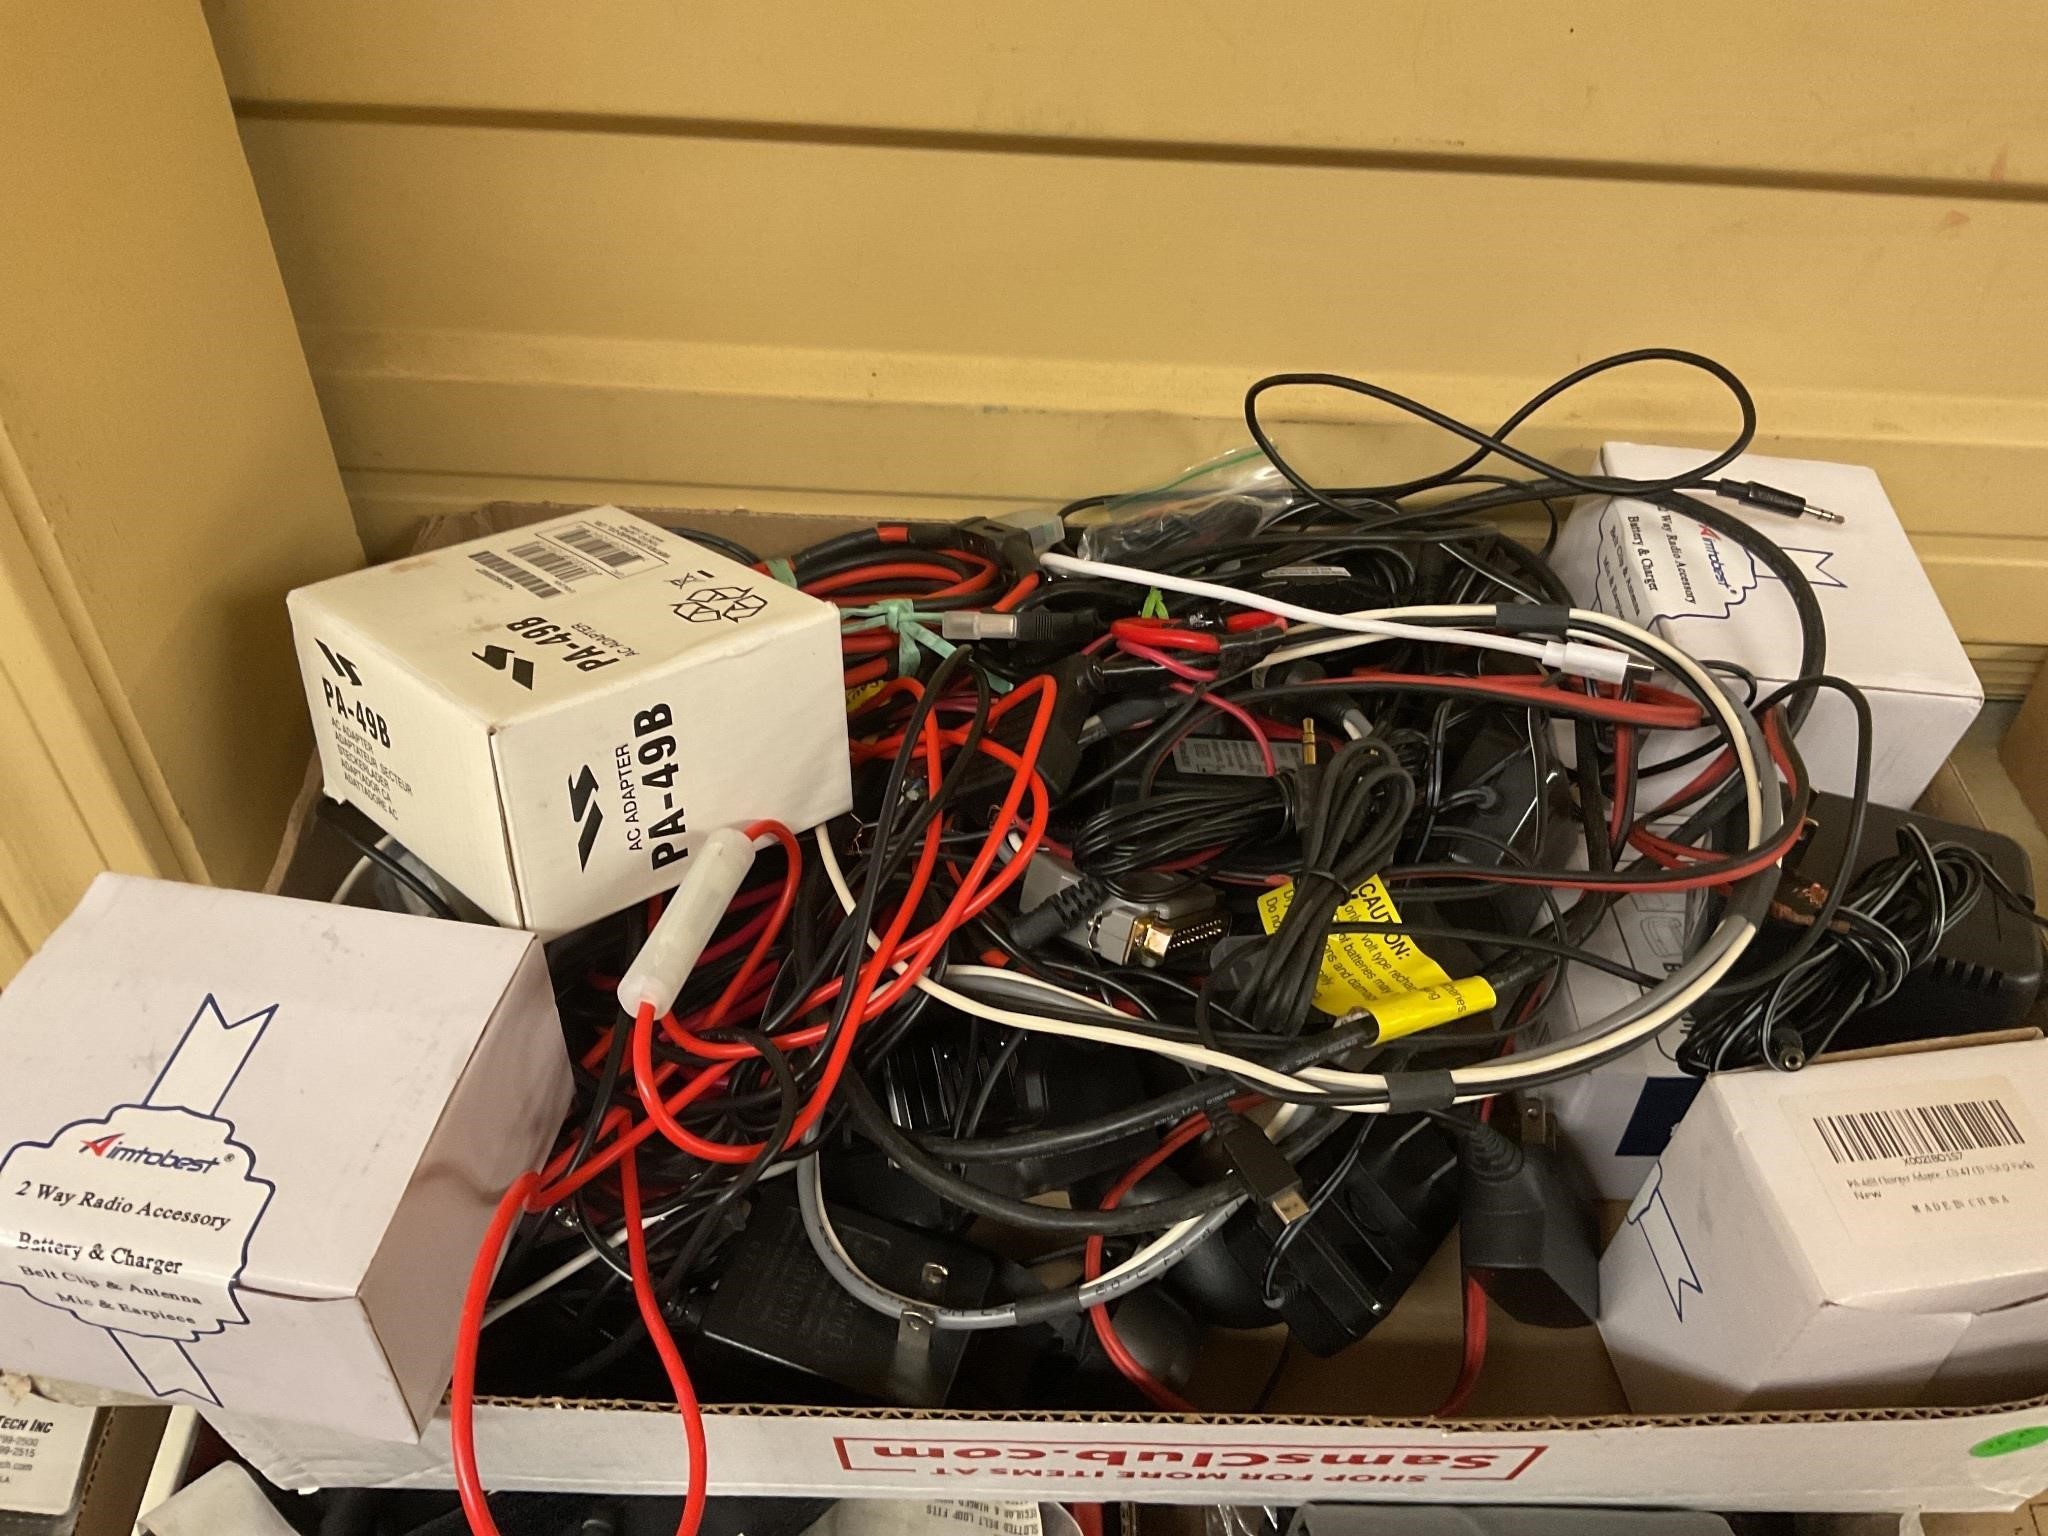 Assorted battery chargers and misc